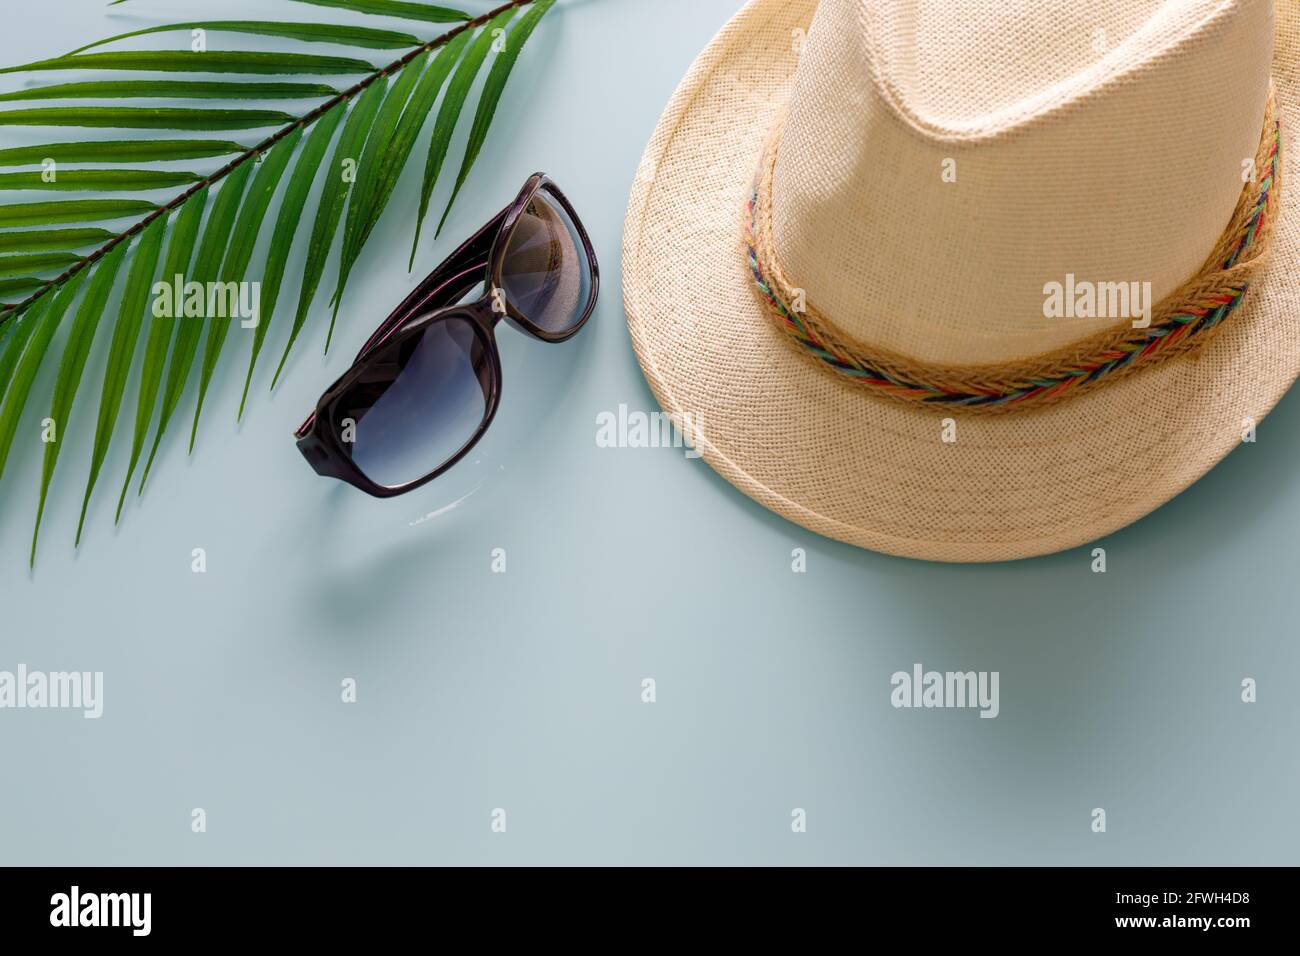 Alamy stock hat 2 - Page Borsalino images hi-res - and photography